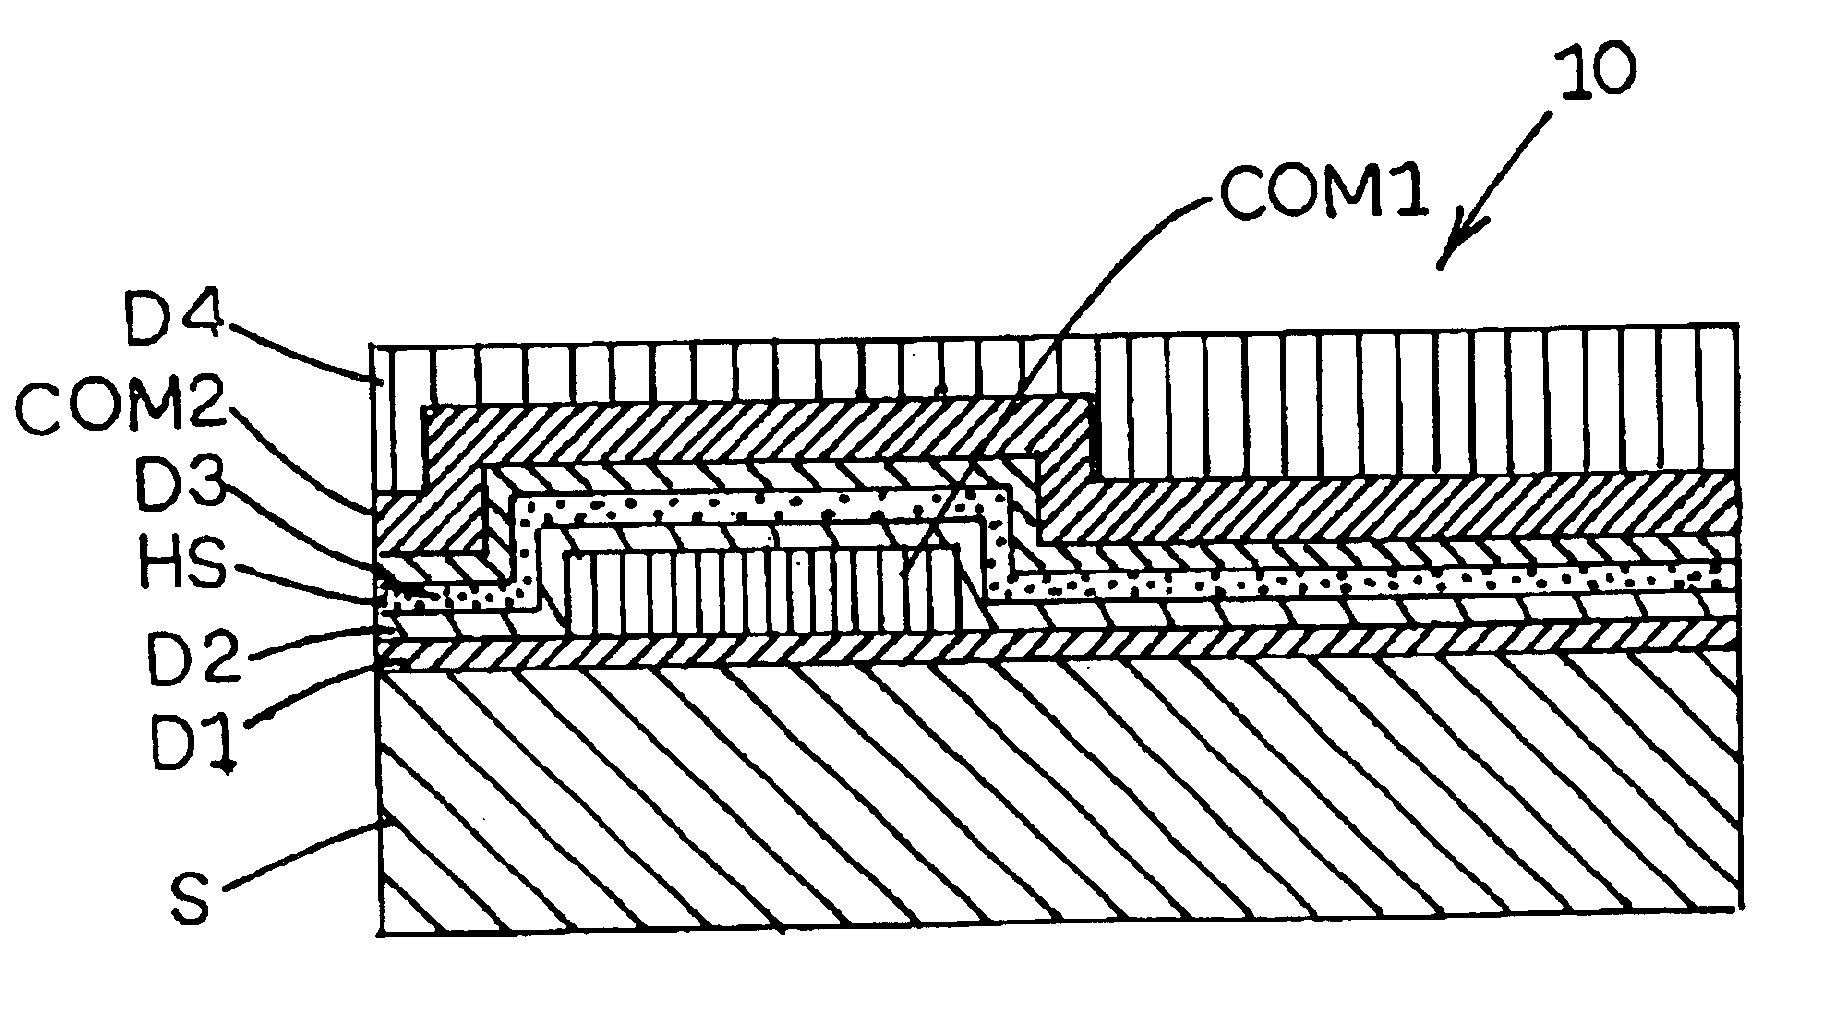 Micro-scale interconnect device with internal heat spreader and method for fabricating same